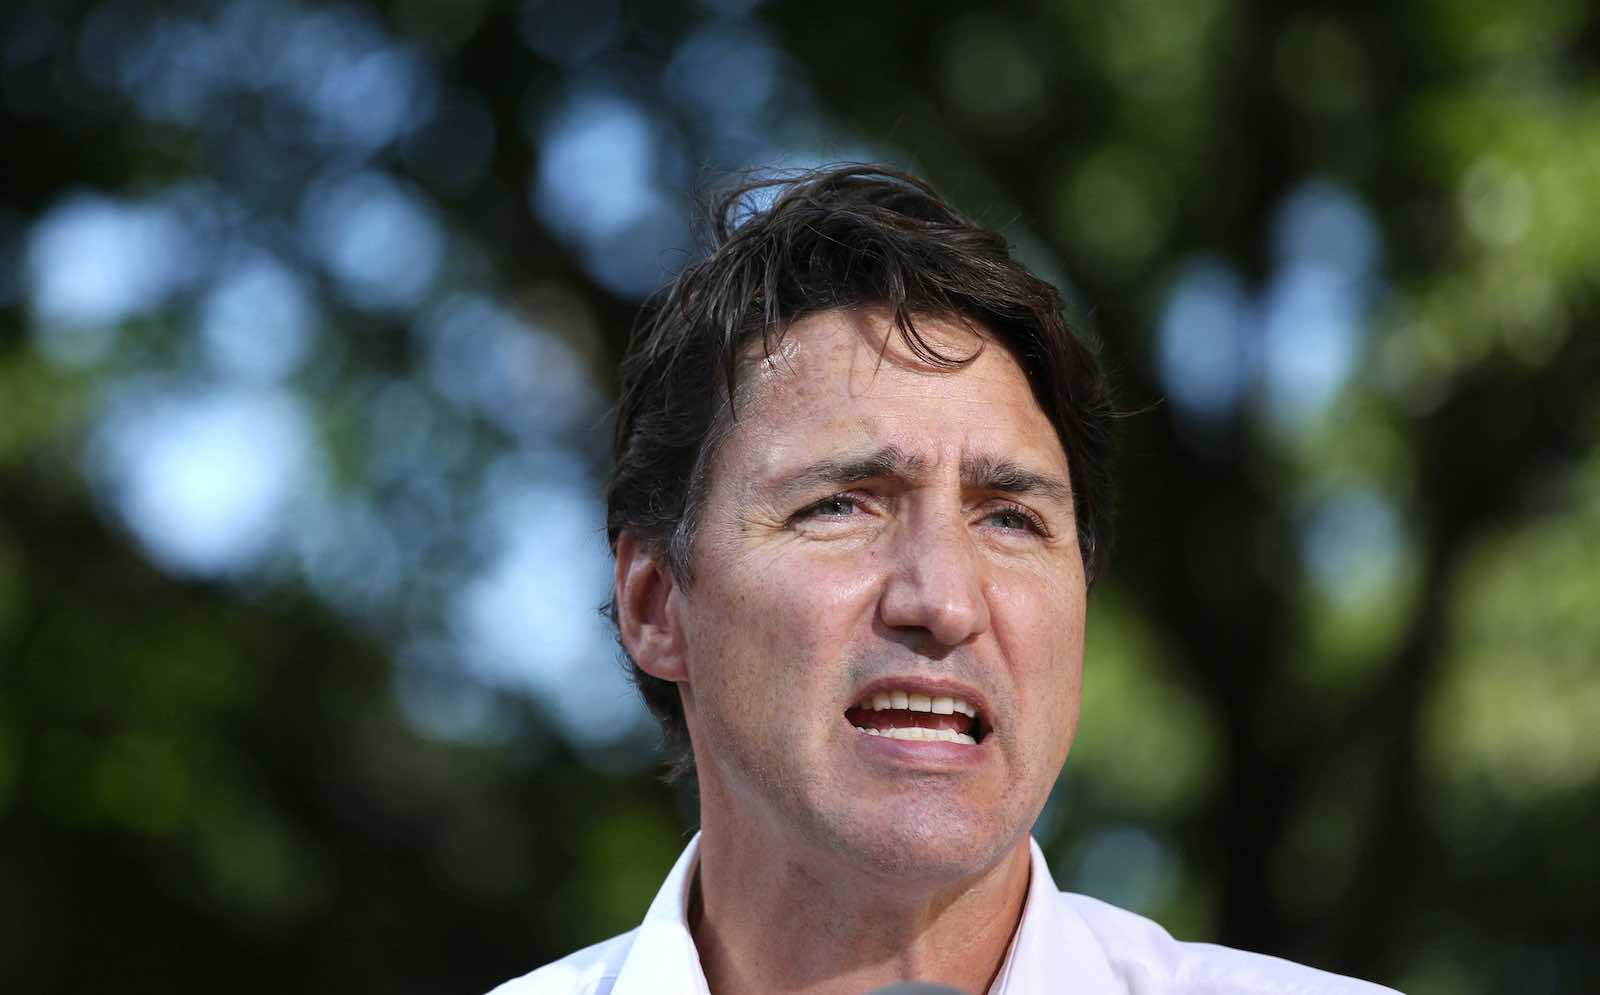  Trudeau now has the status of being just another politician, being asked to run on his record (Dave Chan/AFP via Getty Images)